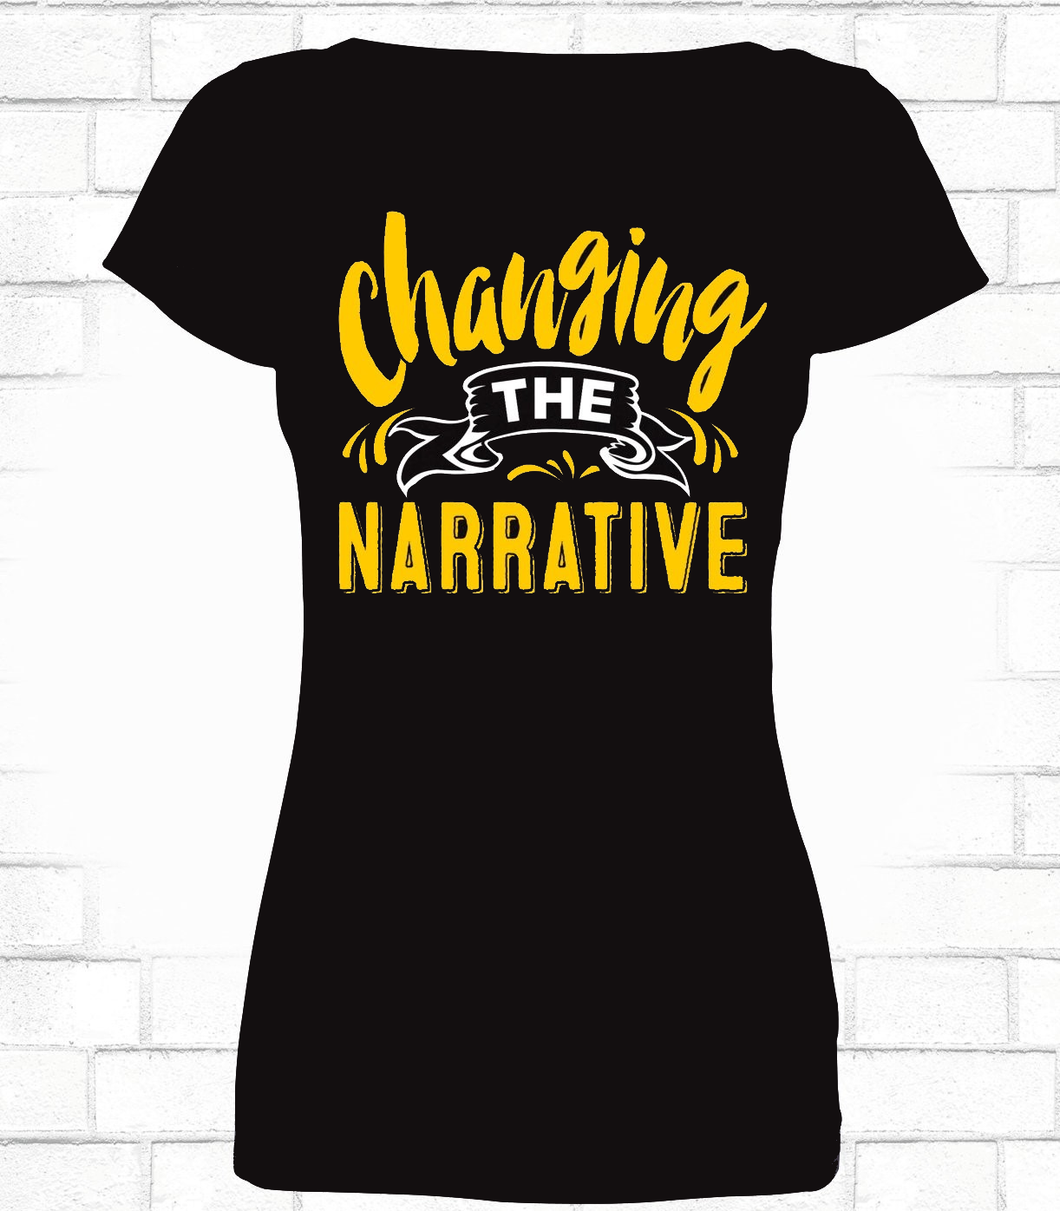 Changing the Narrative 'Golden' Female T-shirt